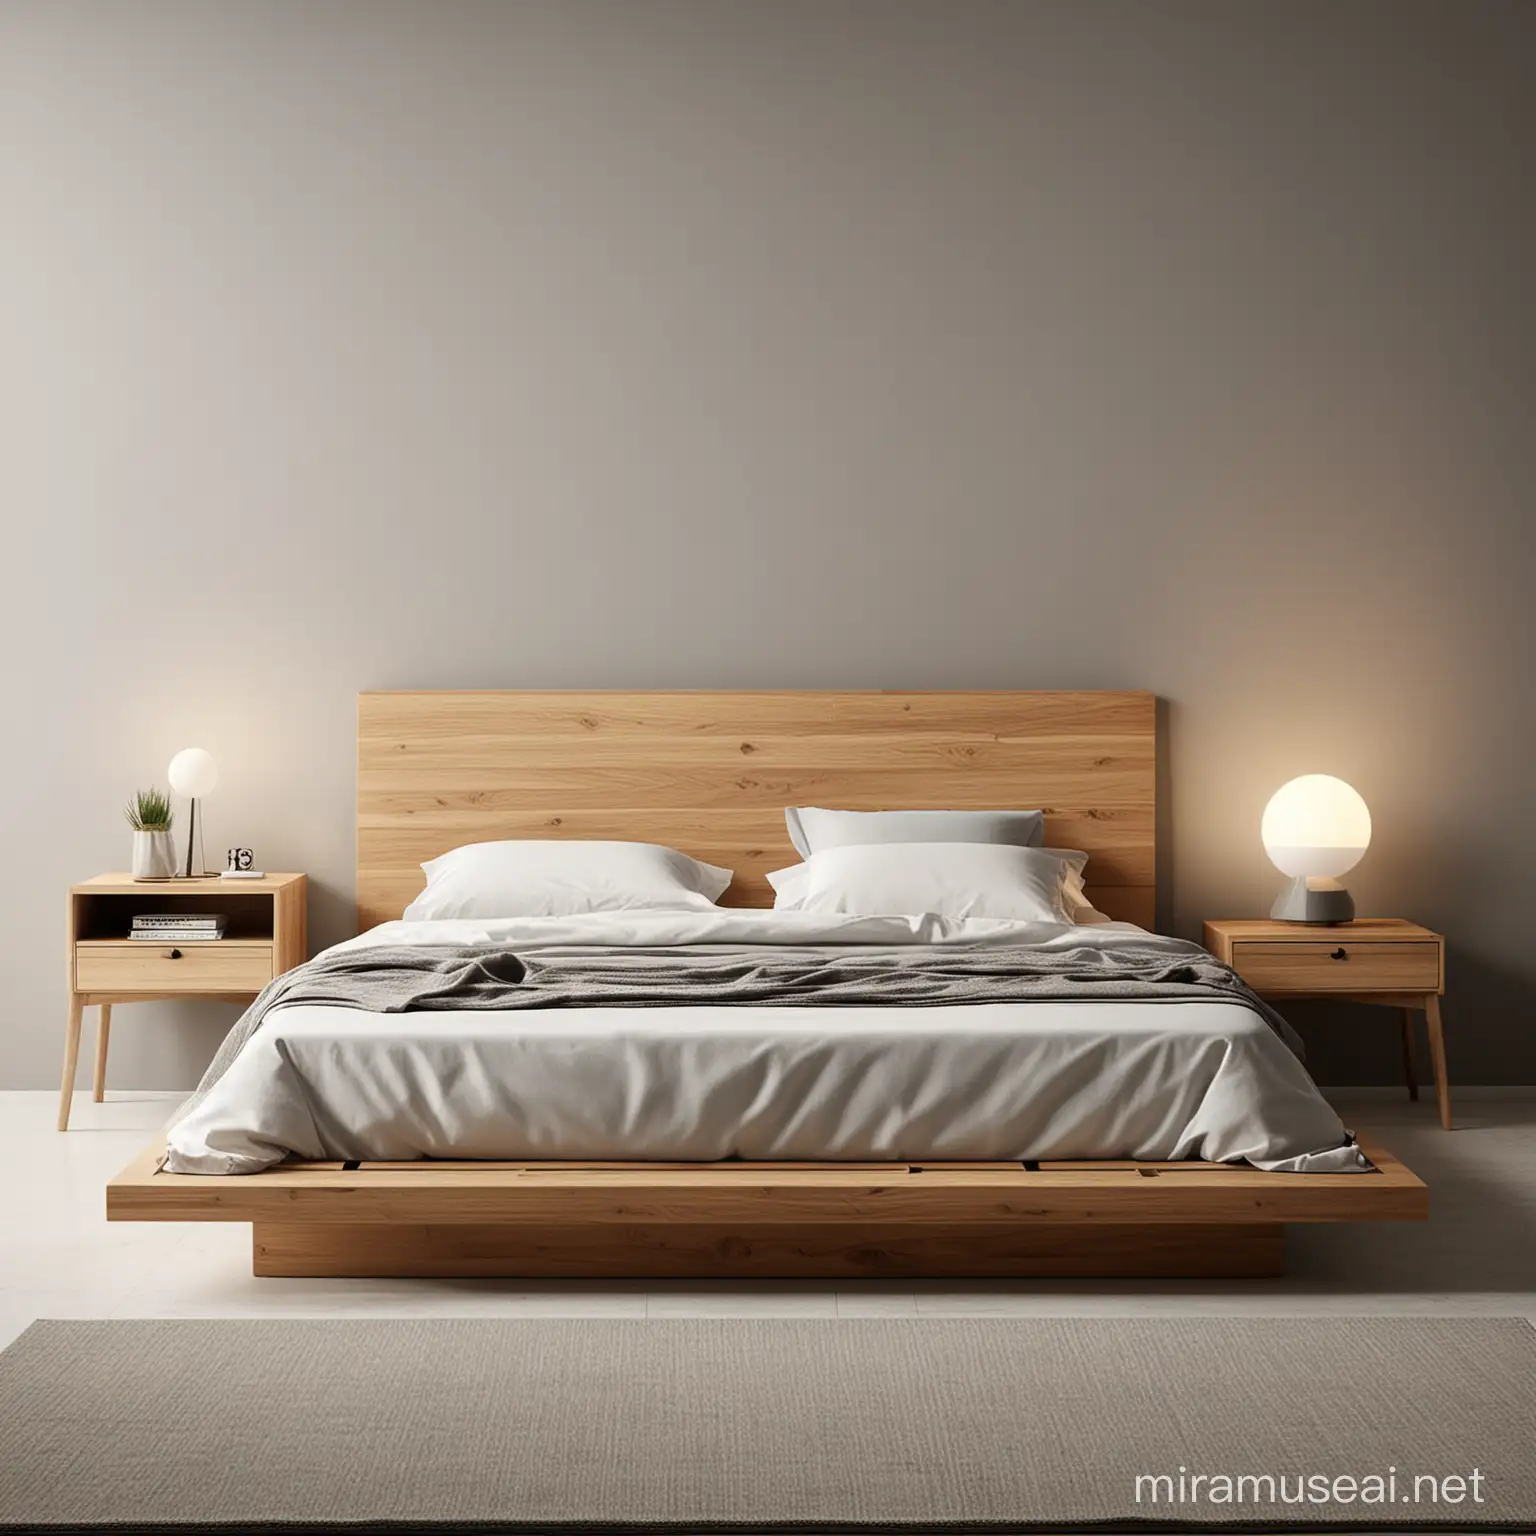 Minimalist Home Decor with Central Bed and Stylish Accessories